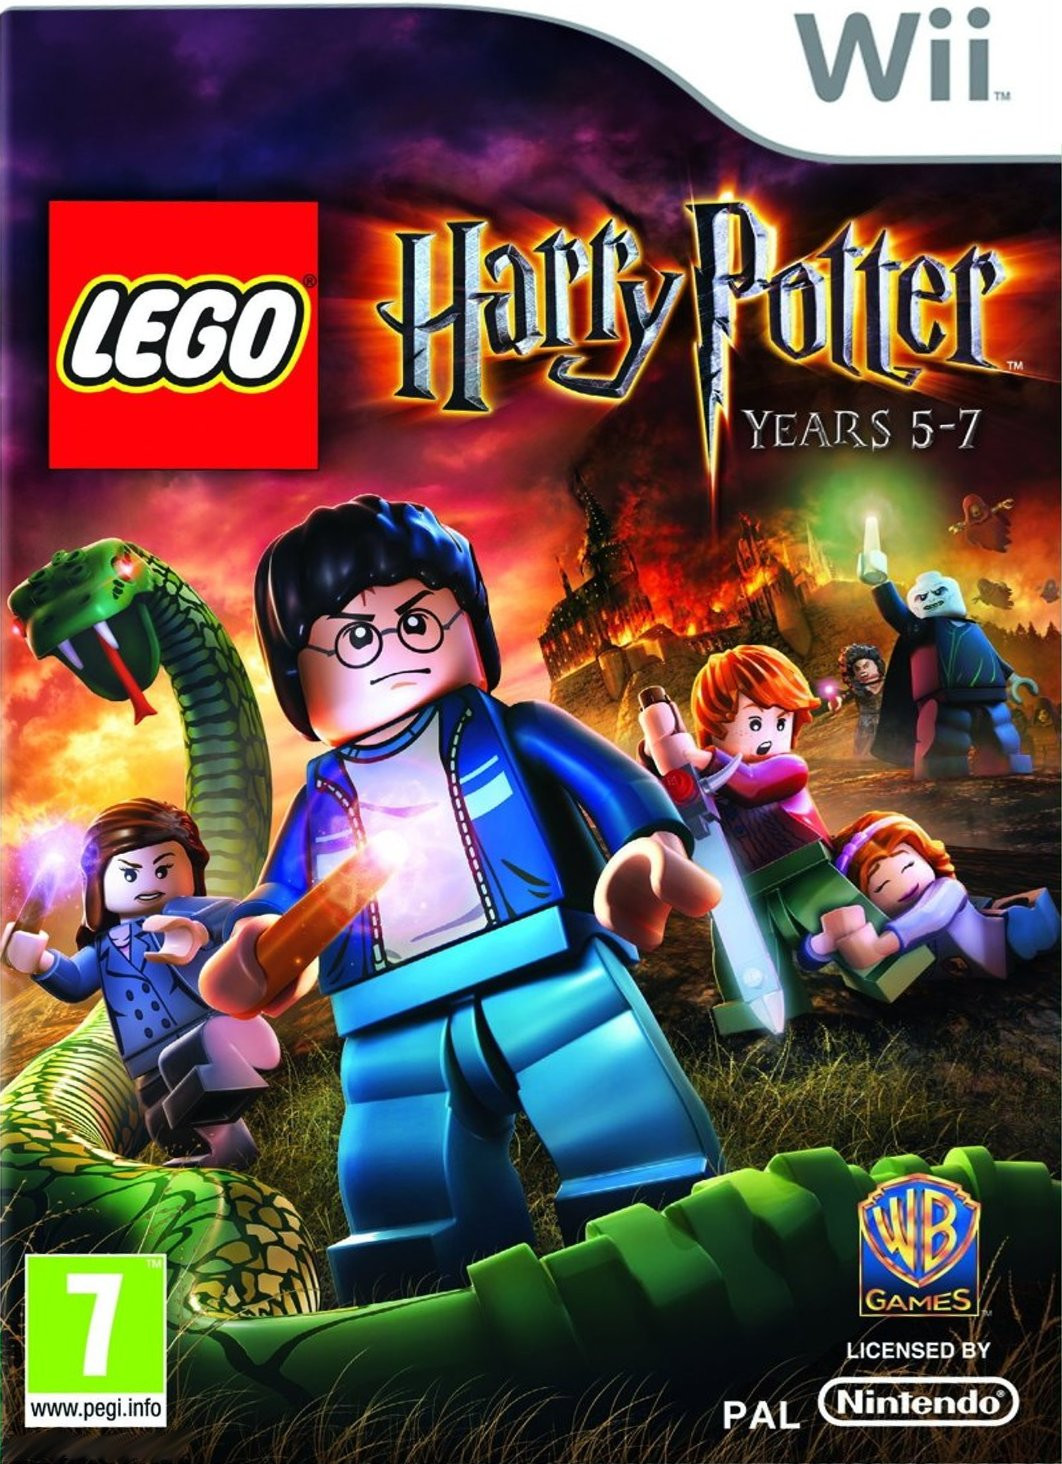 buy-lego-harry-potter-years-5-7-wii-from-39-79-today-best-deals-on-idealo-co-uk